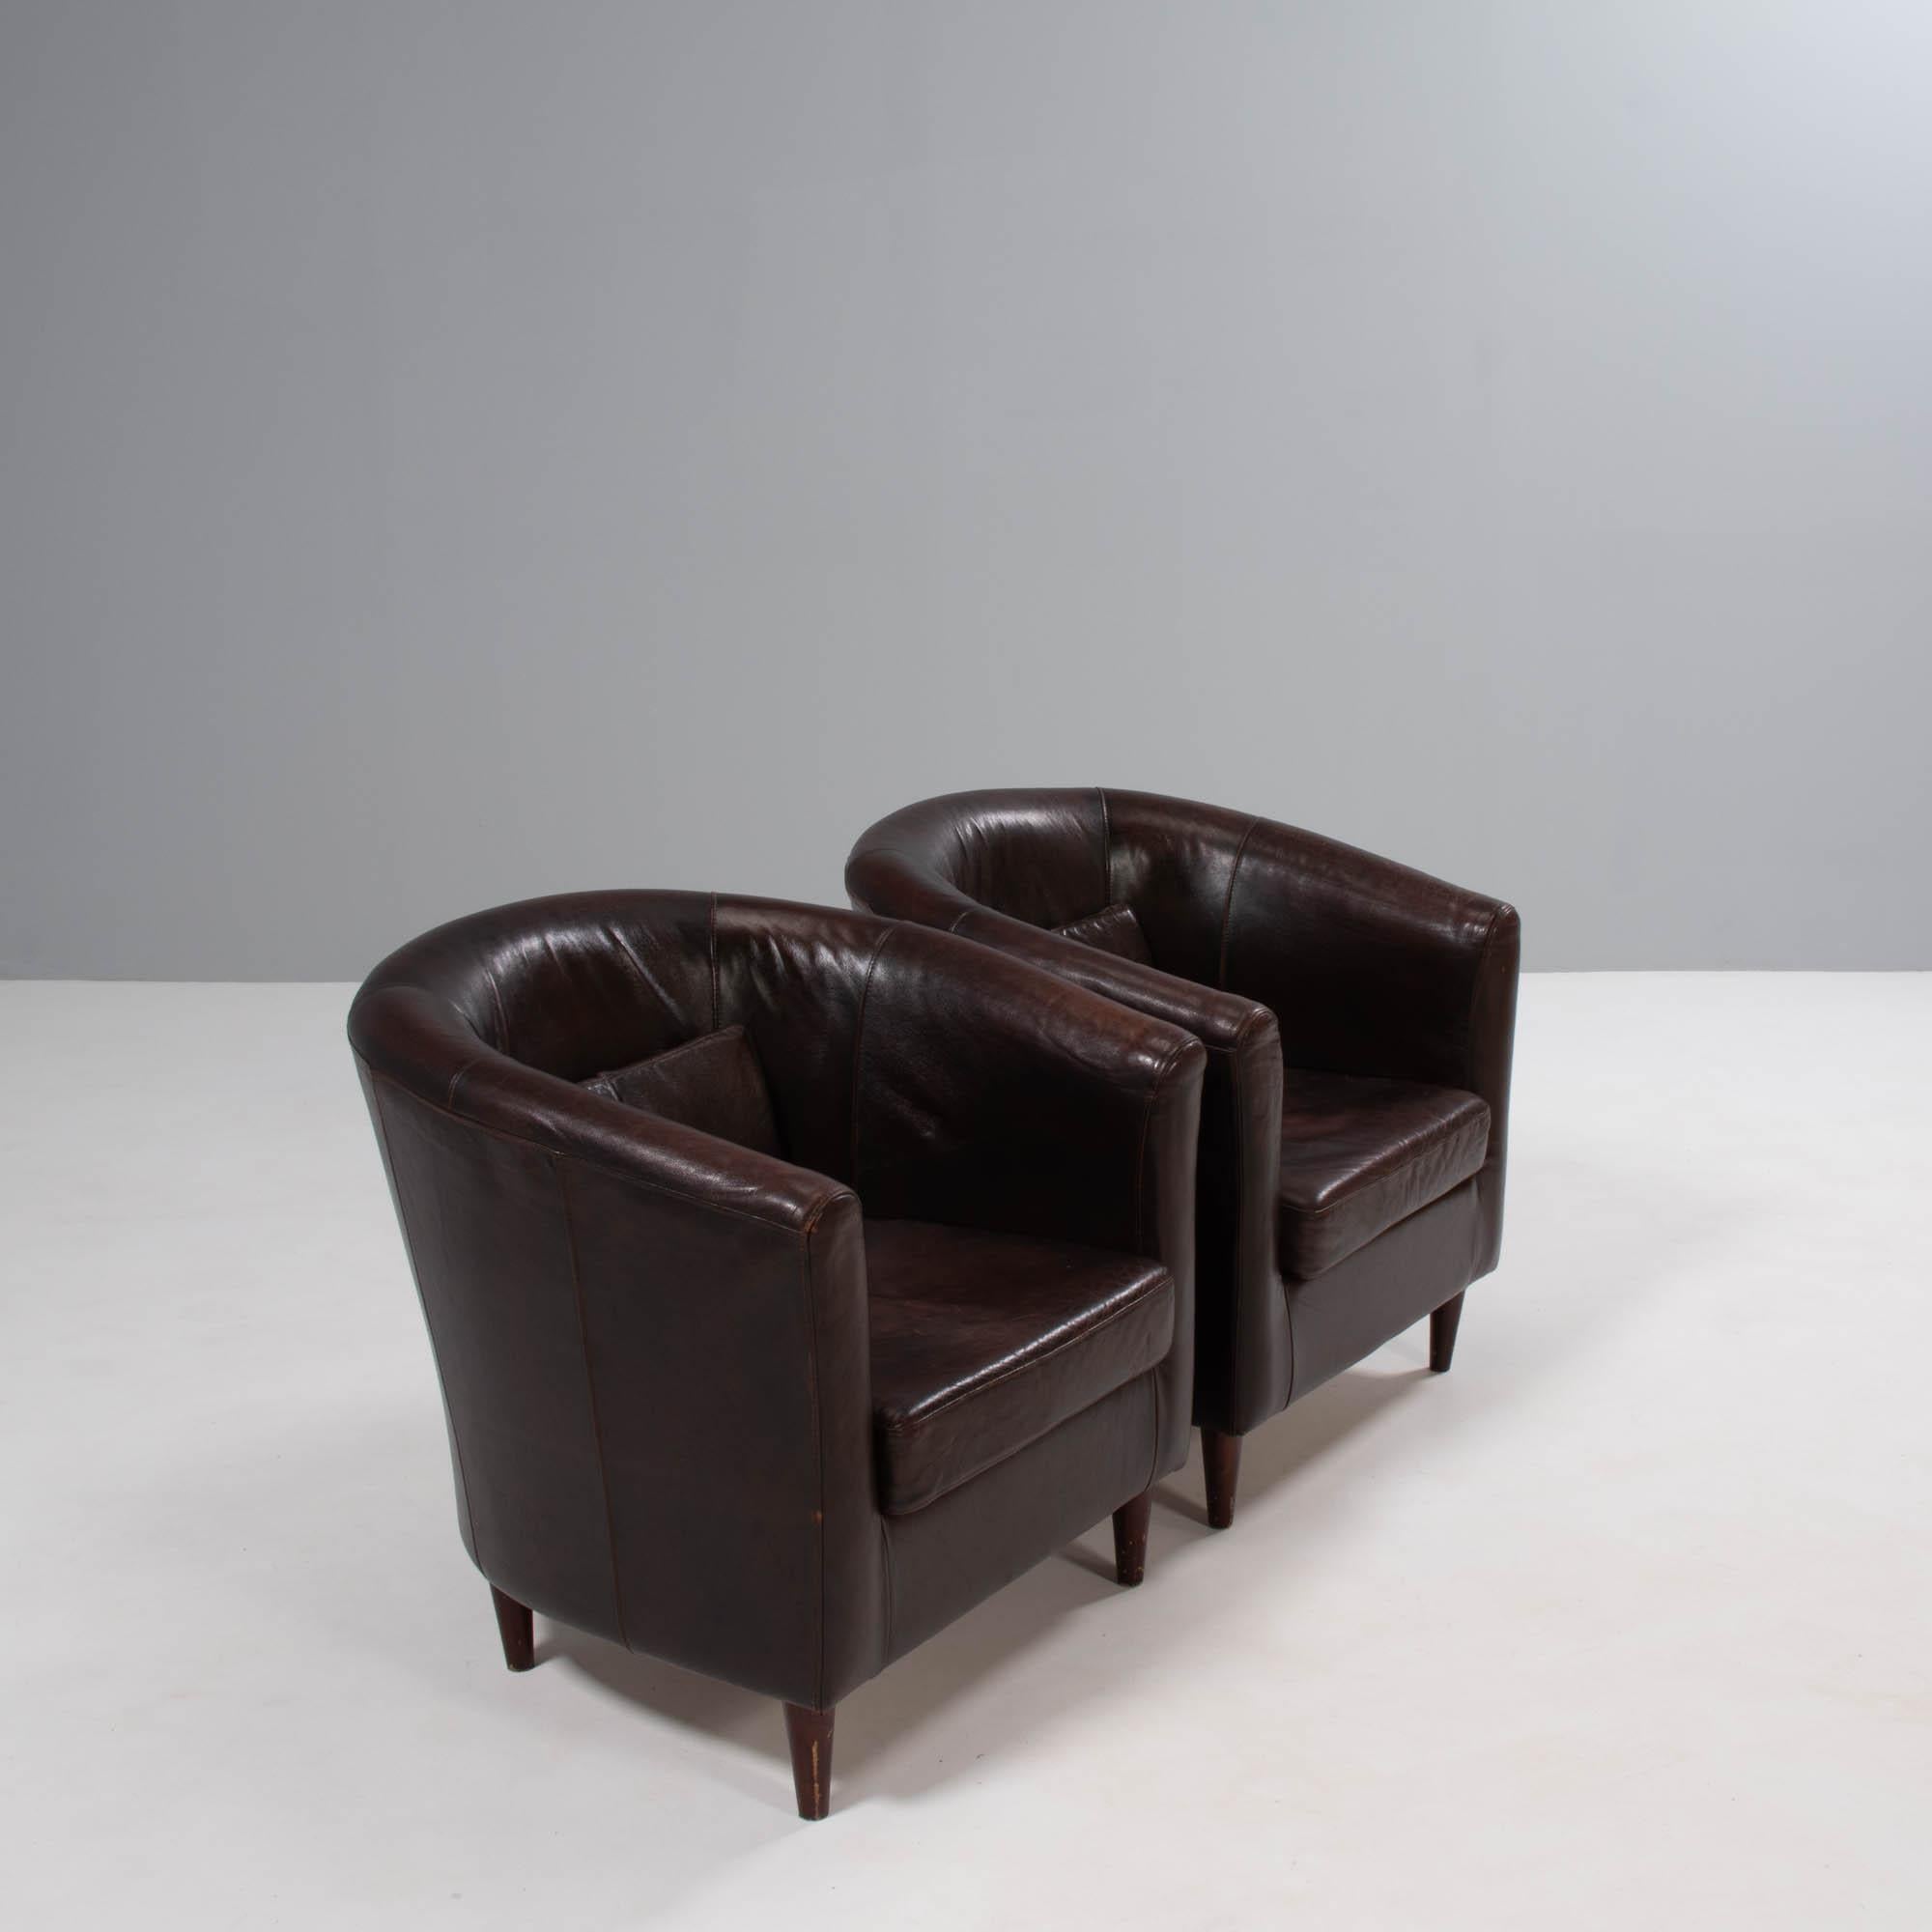 A pair of vintage tub chairs, fully upholstered in dark brown leather with wooden feet.

The chairs have curved backrests and integrated arms, creating the tub silhouette with a seat cushion and additional back cushion for extra comfort.

A